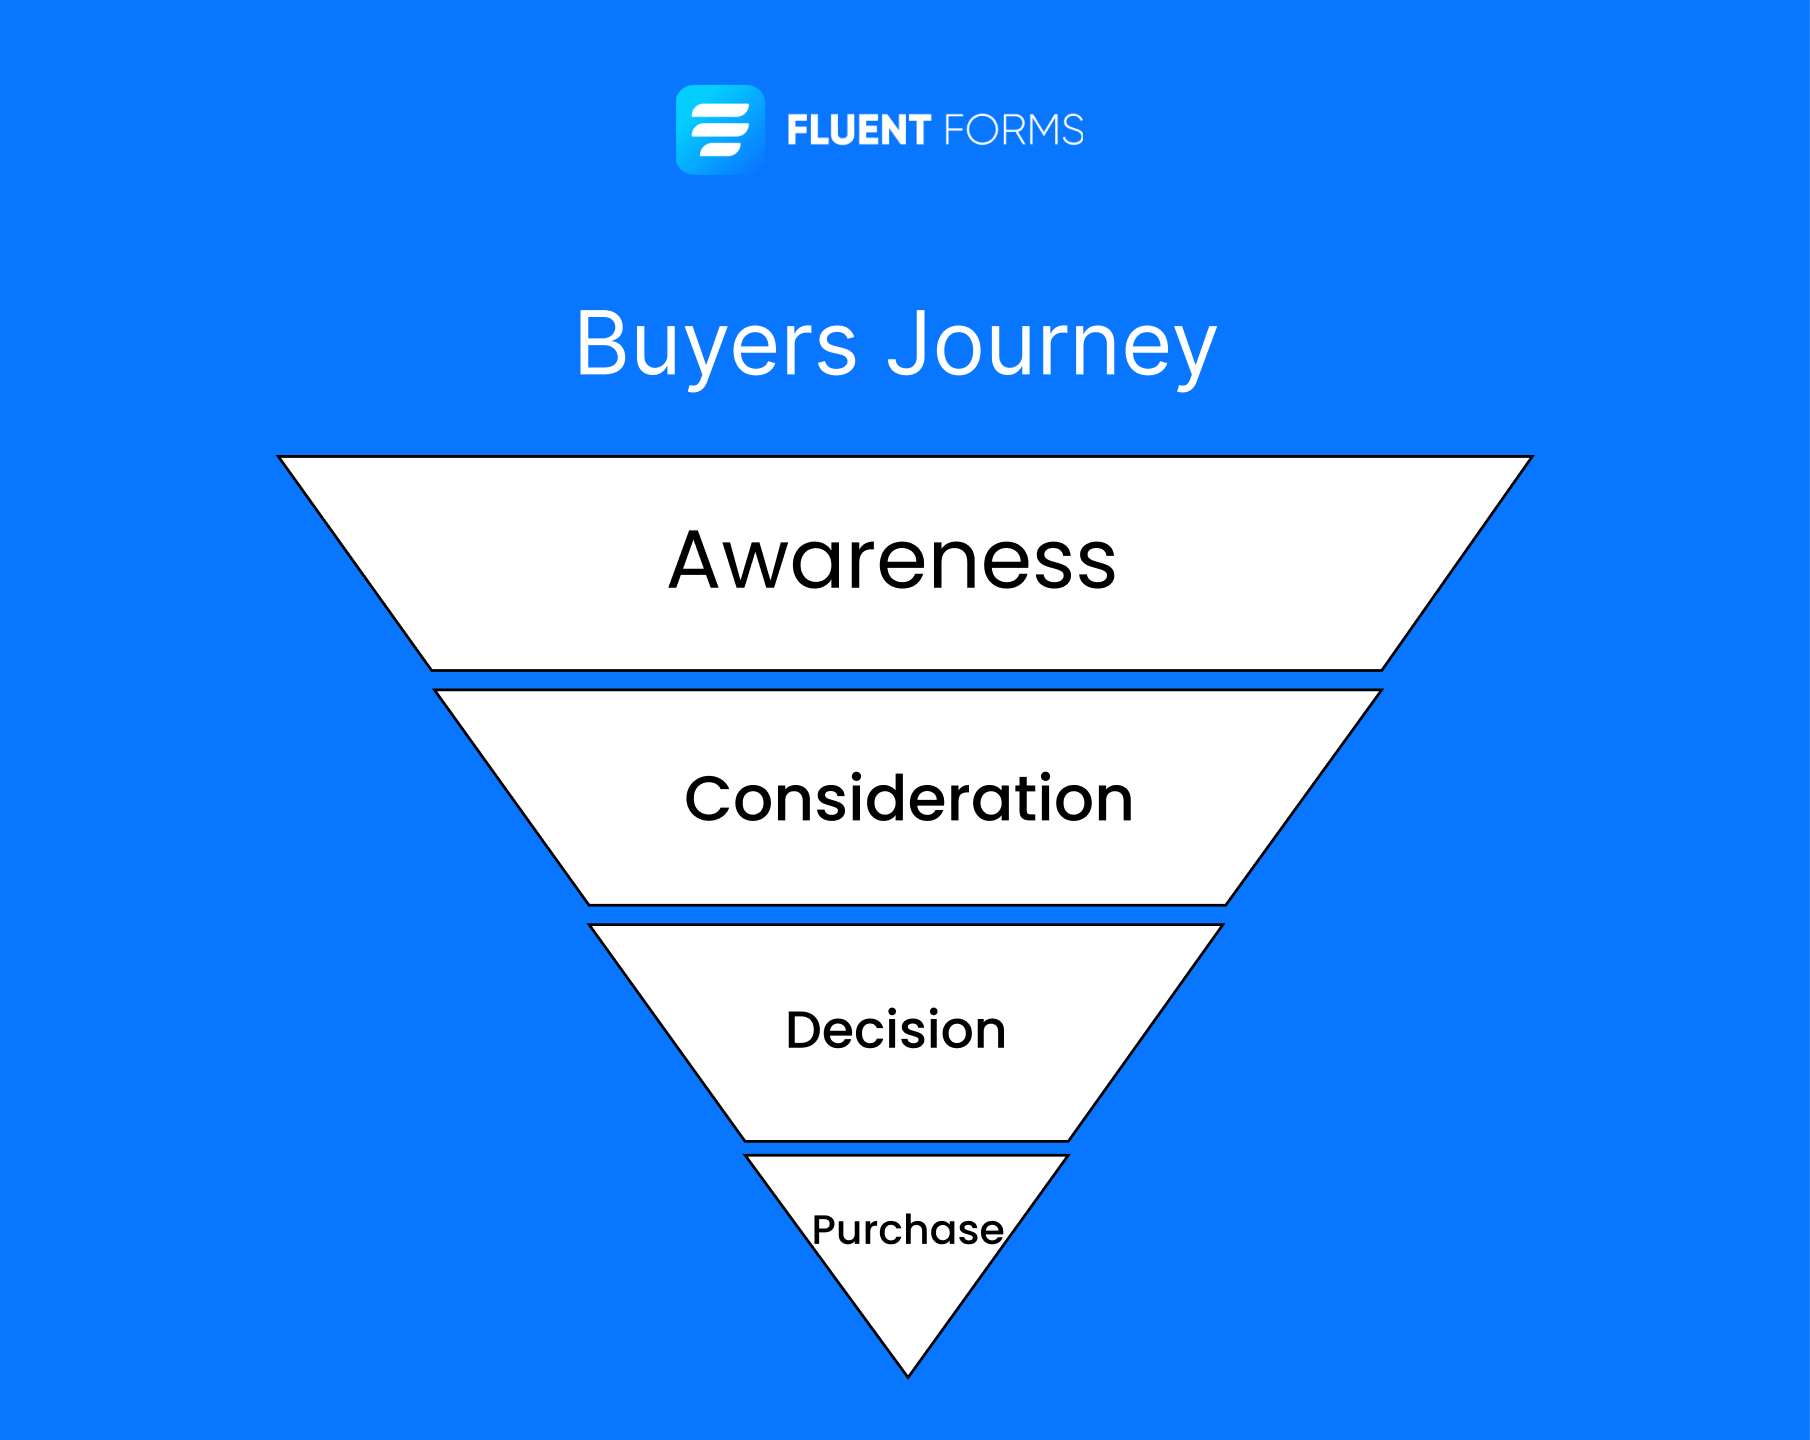 4 stages of Buyers journey
